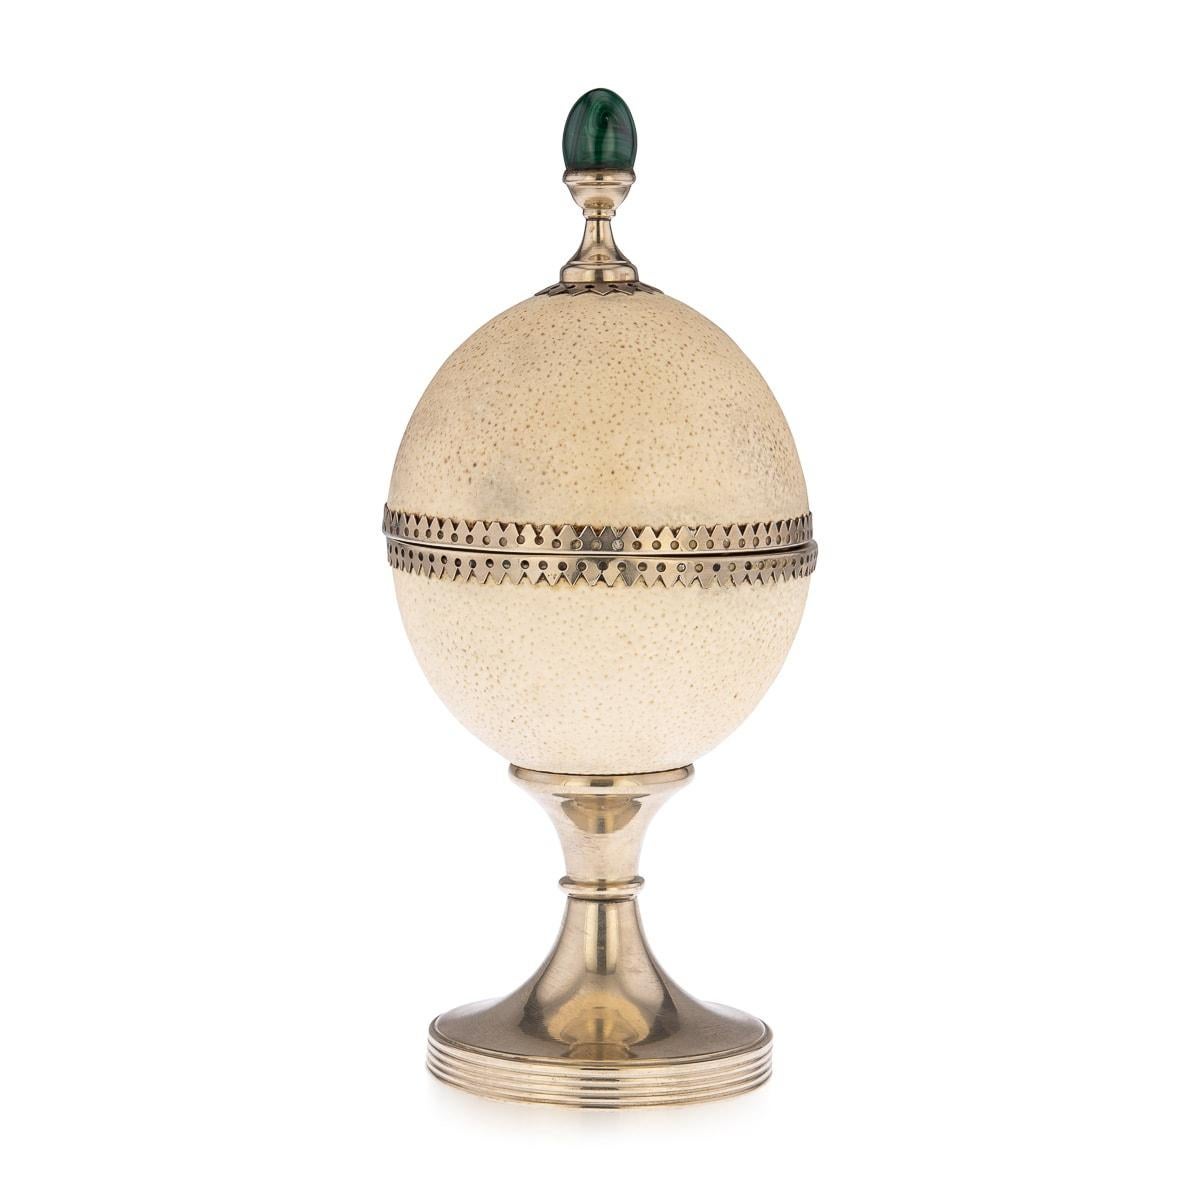 20th Century Anthony Redmile Ostrich Egg Box Mounted on Silver Plated Cup, London, c.1970